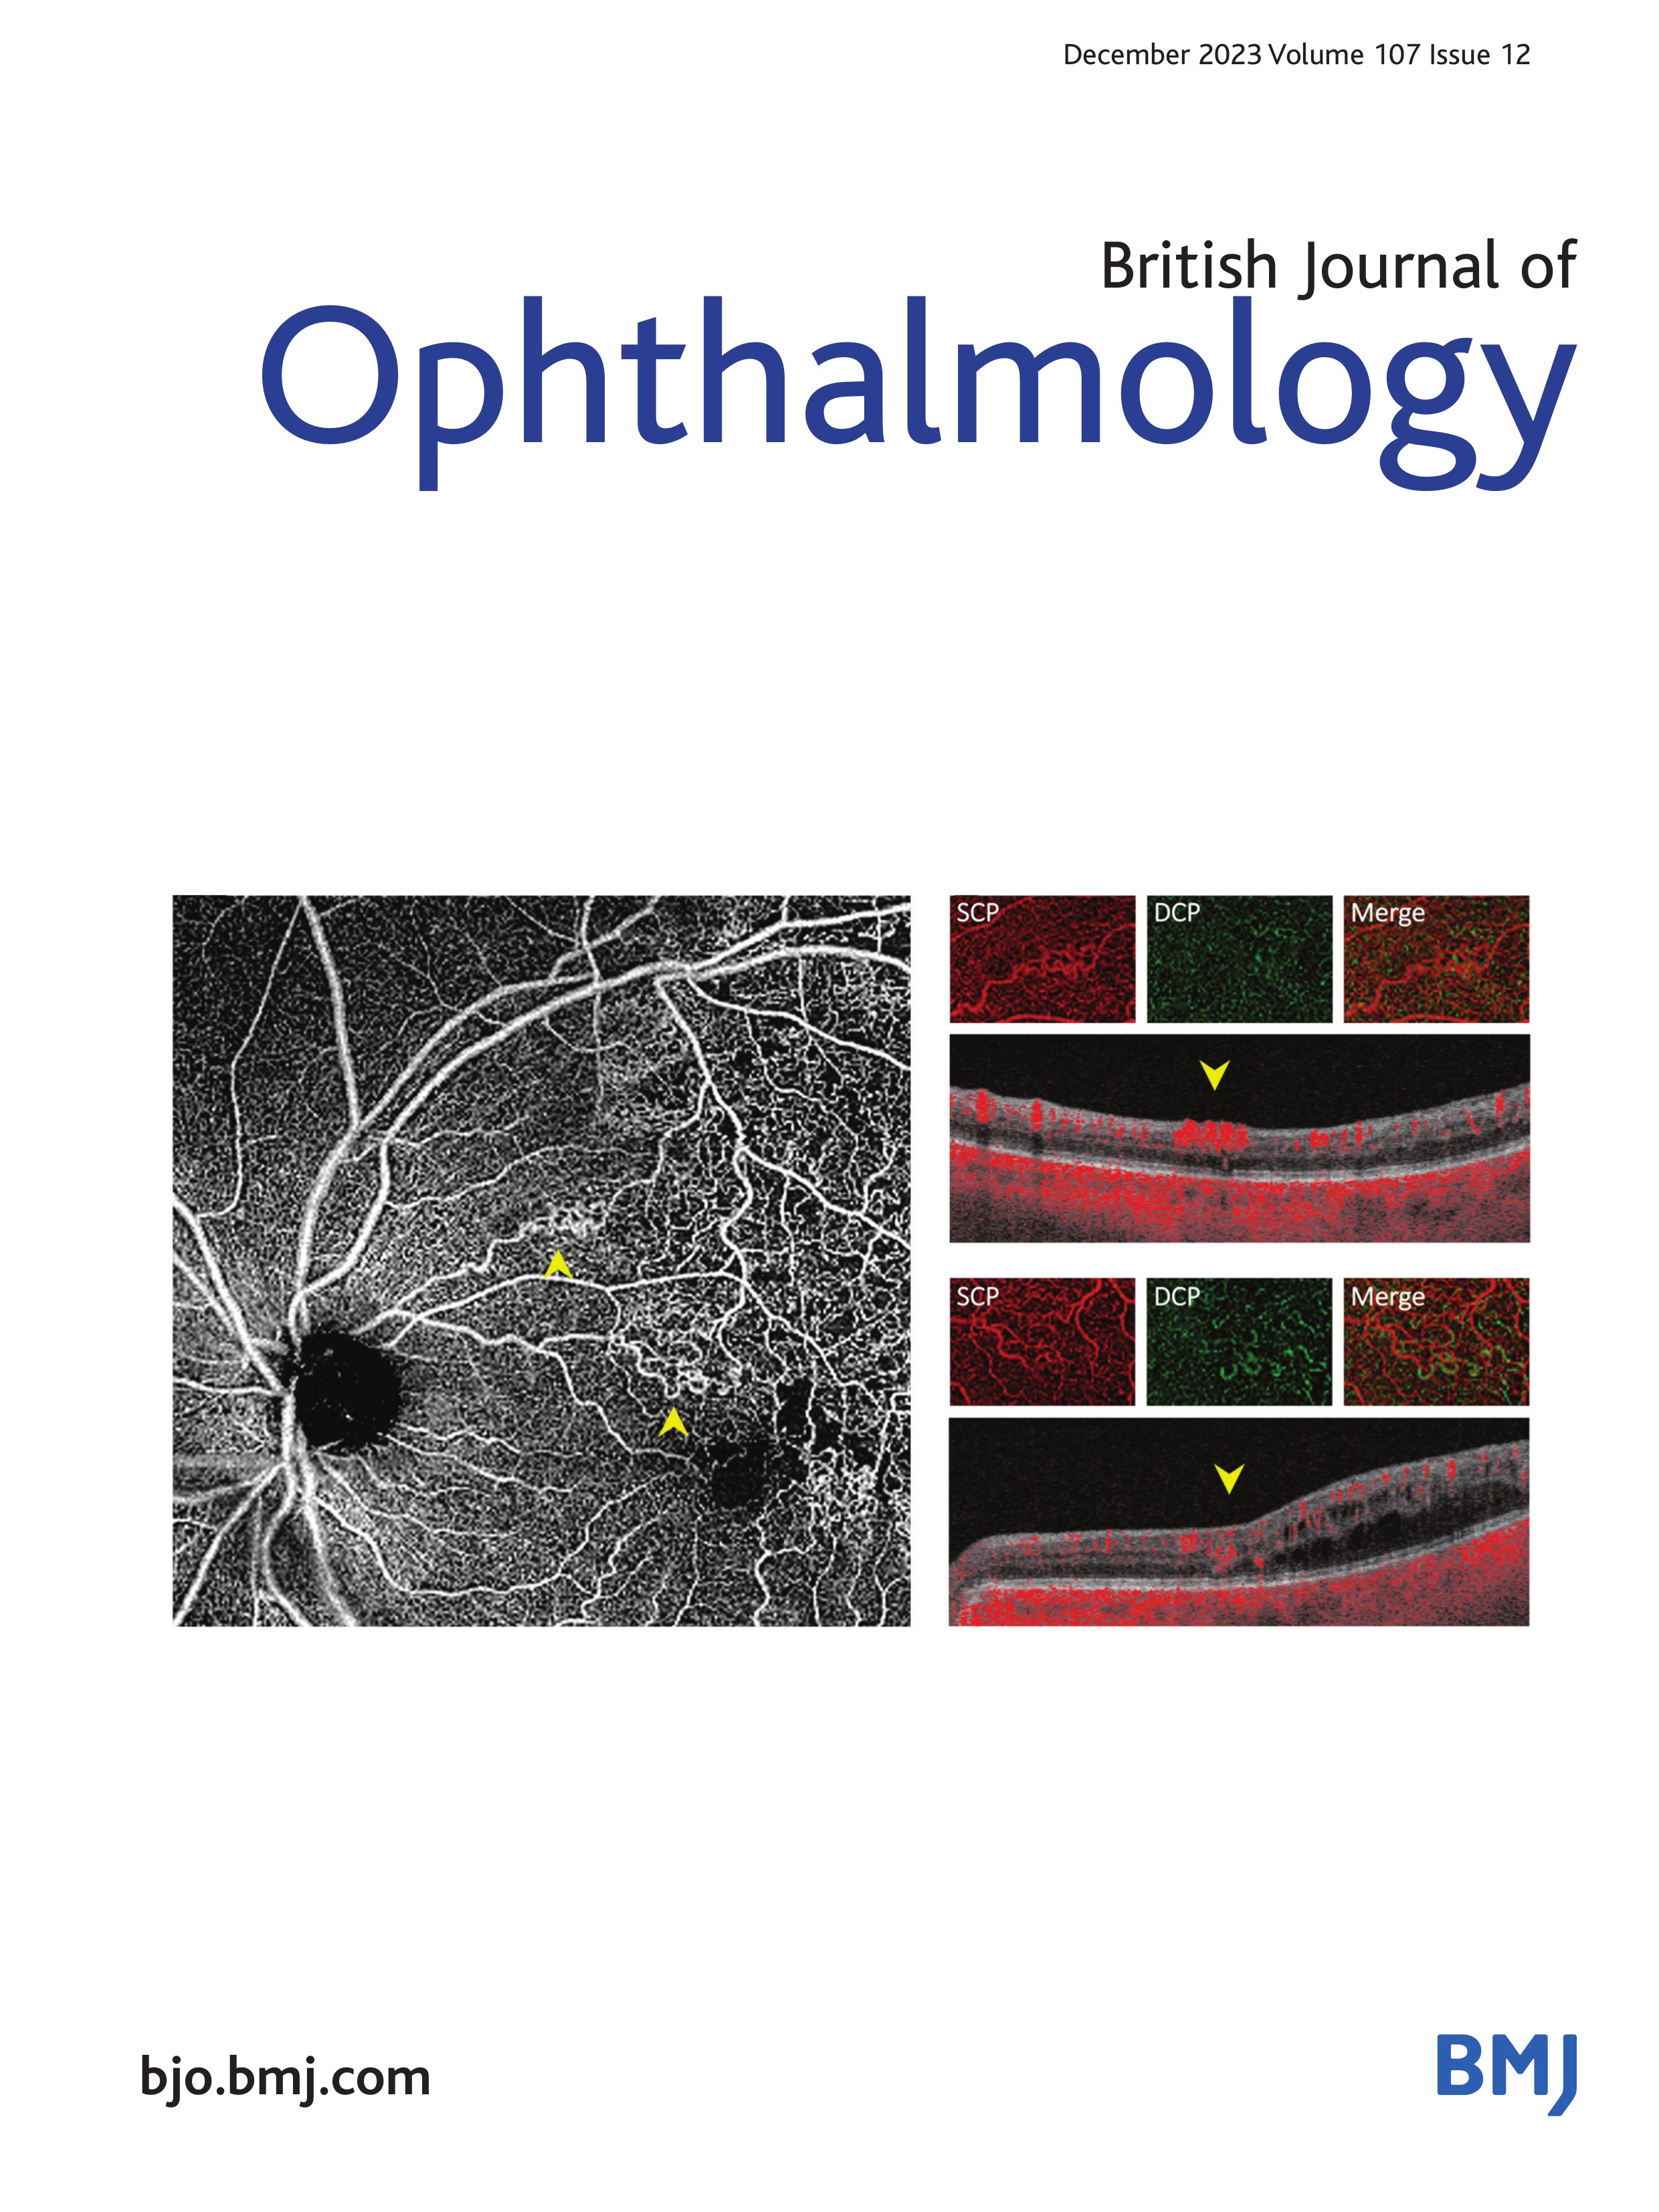 Comparison of mini-simple limbal epithelial transplantation and conjunctival-limbal autograft for the treatment of primary pterygium: a randomised controlled trial